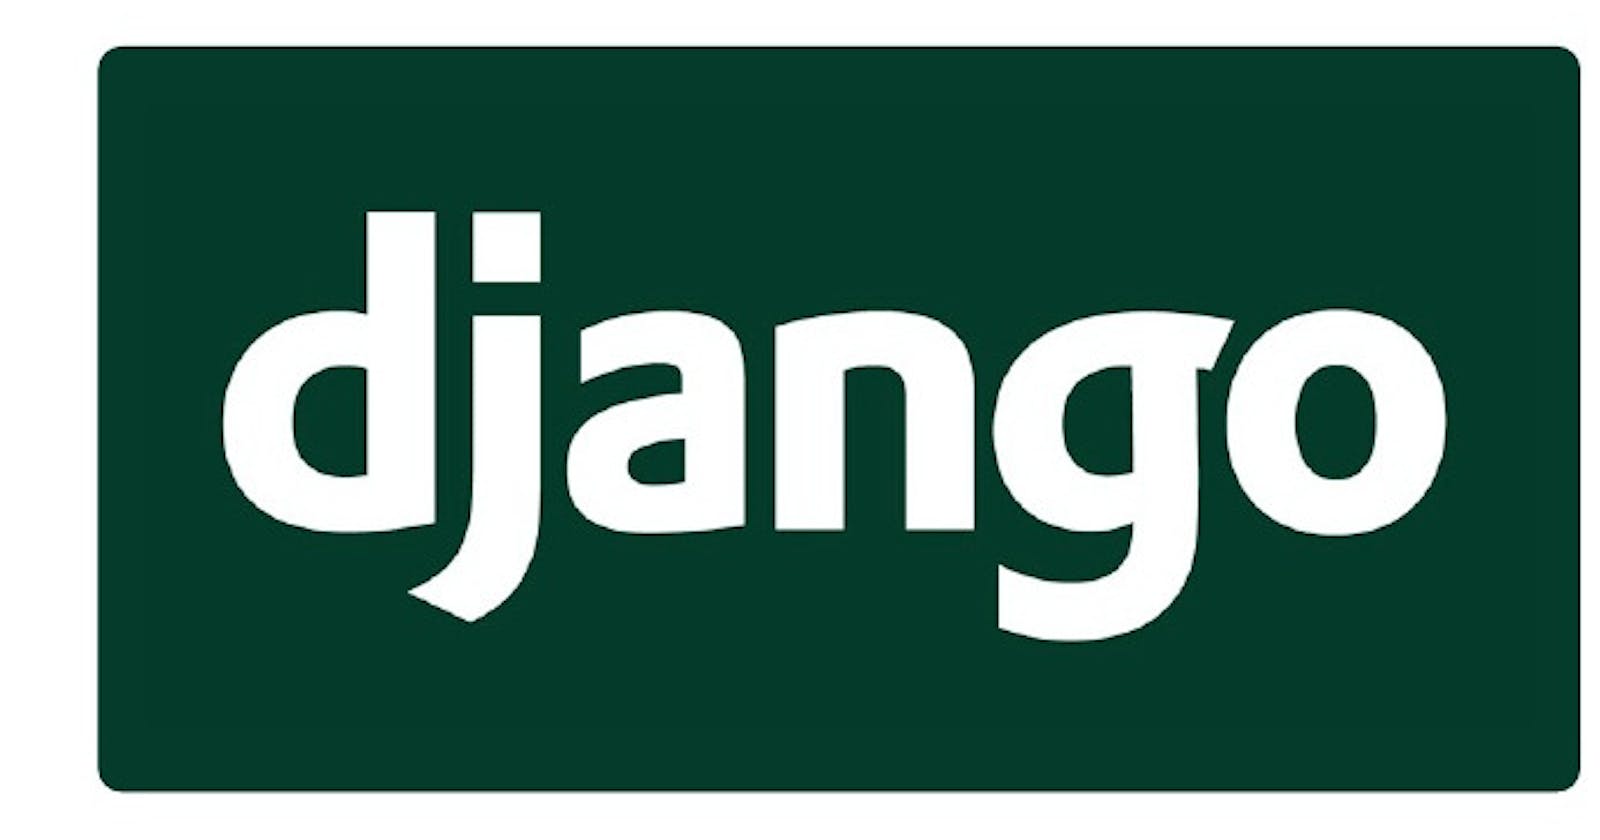 Writing automated tests for your Django app | An introduction to continuous integration (CI)